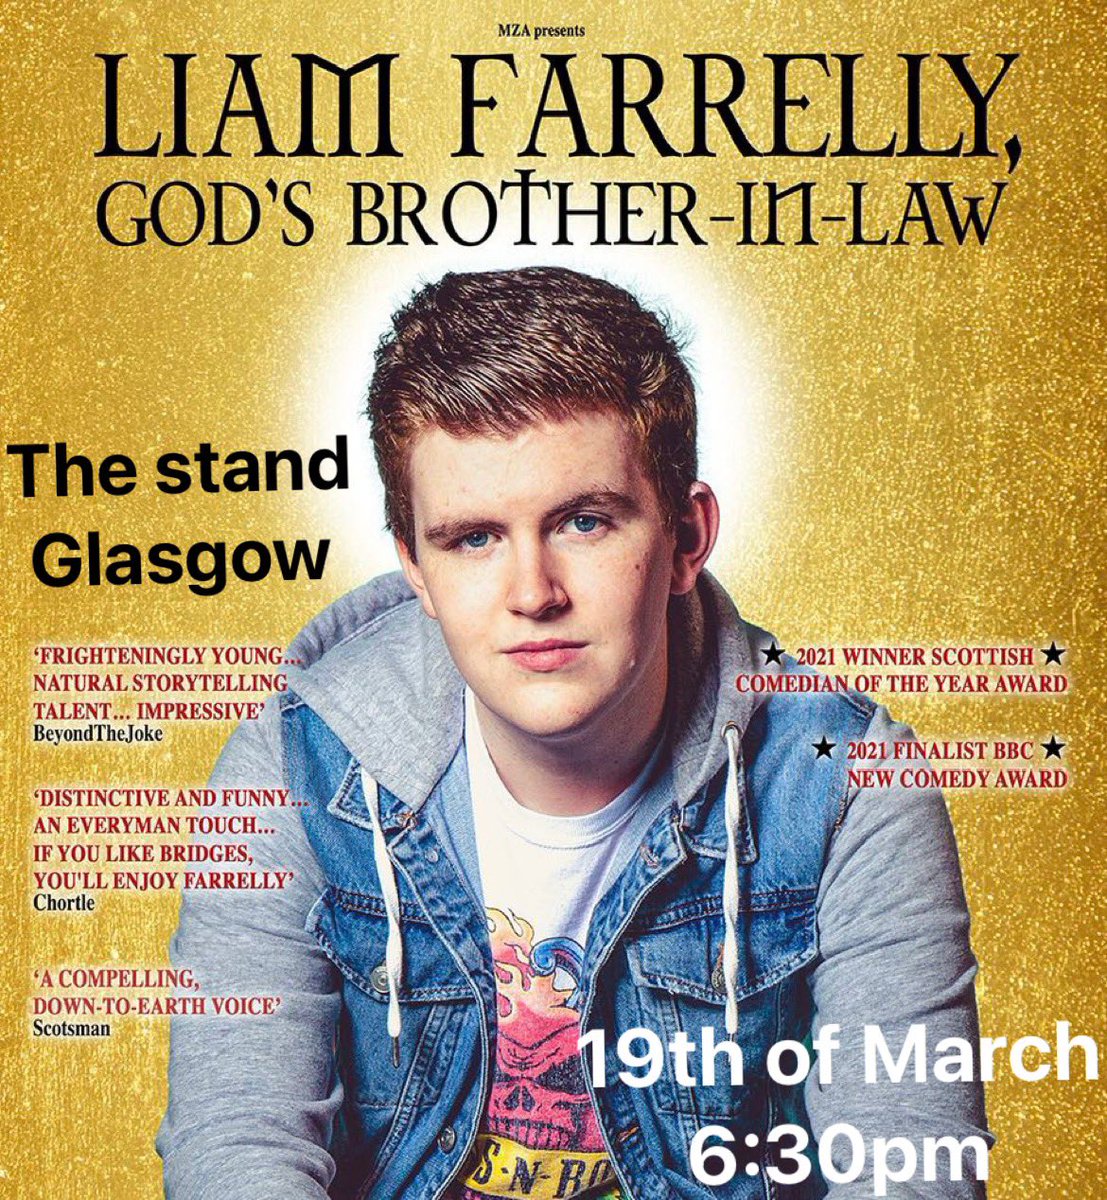 Tickets for my Glasgow comedy festival are now on sale, make sure you get your tickets book it’s going to be a fun show! thestand.co.uk/performances/1…